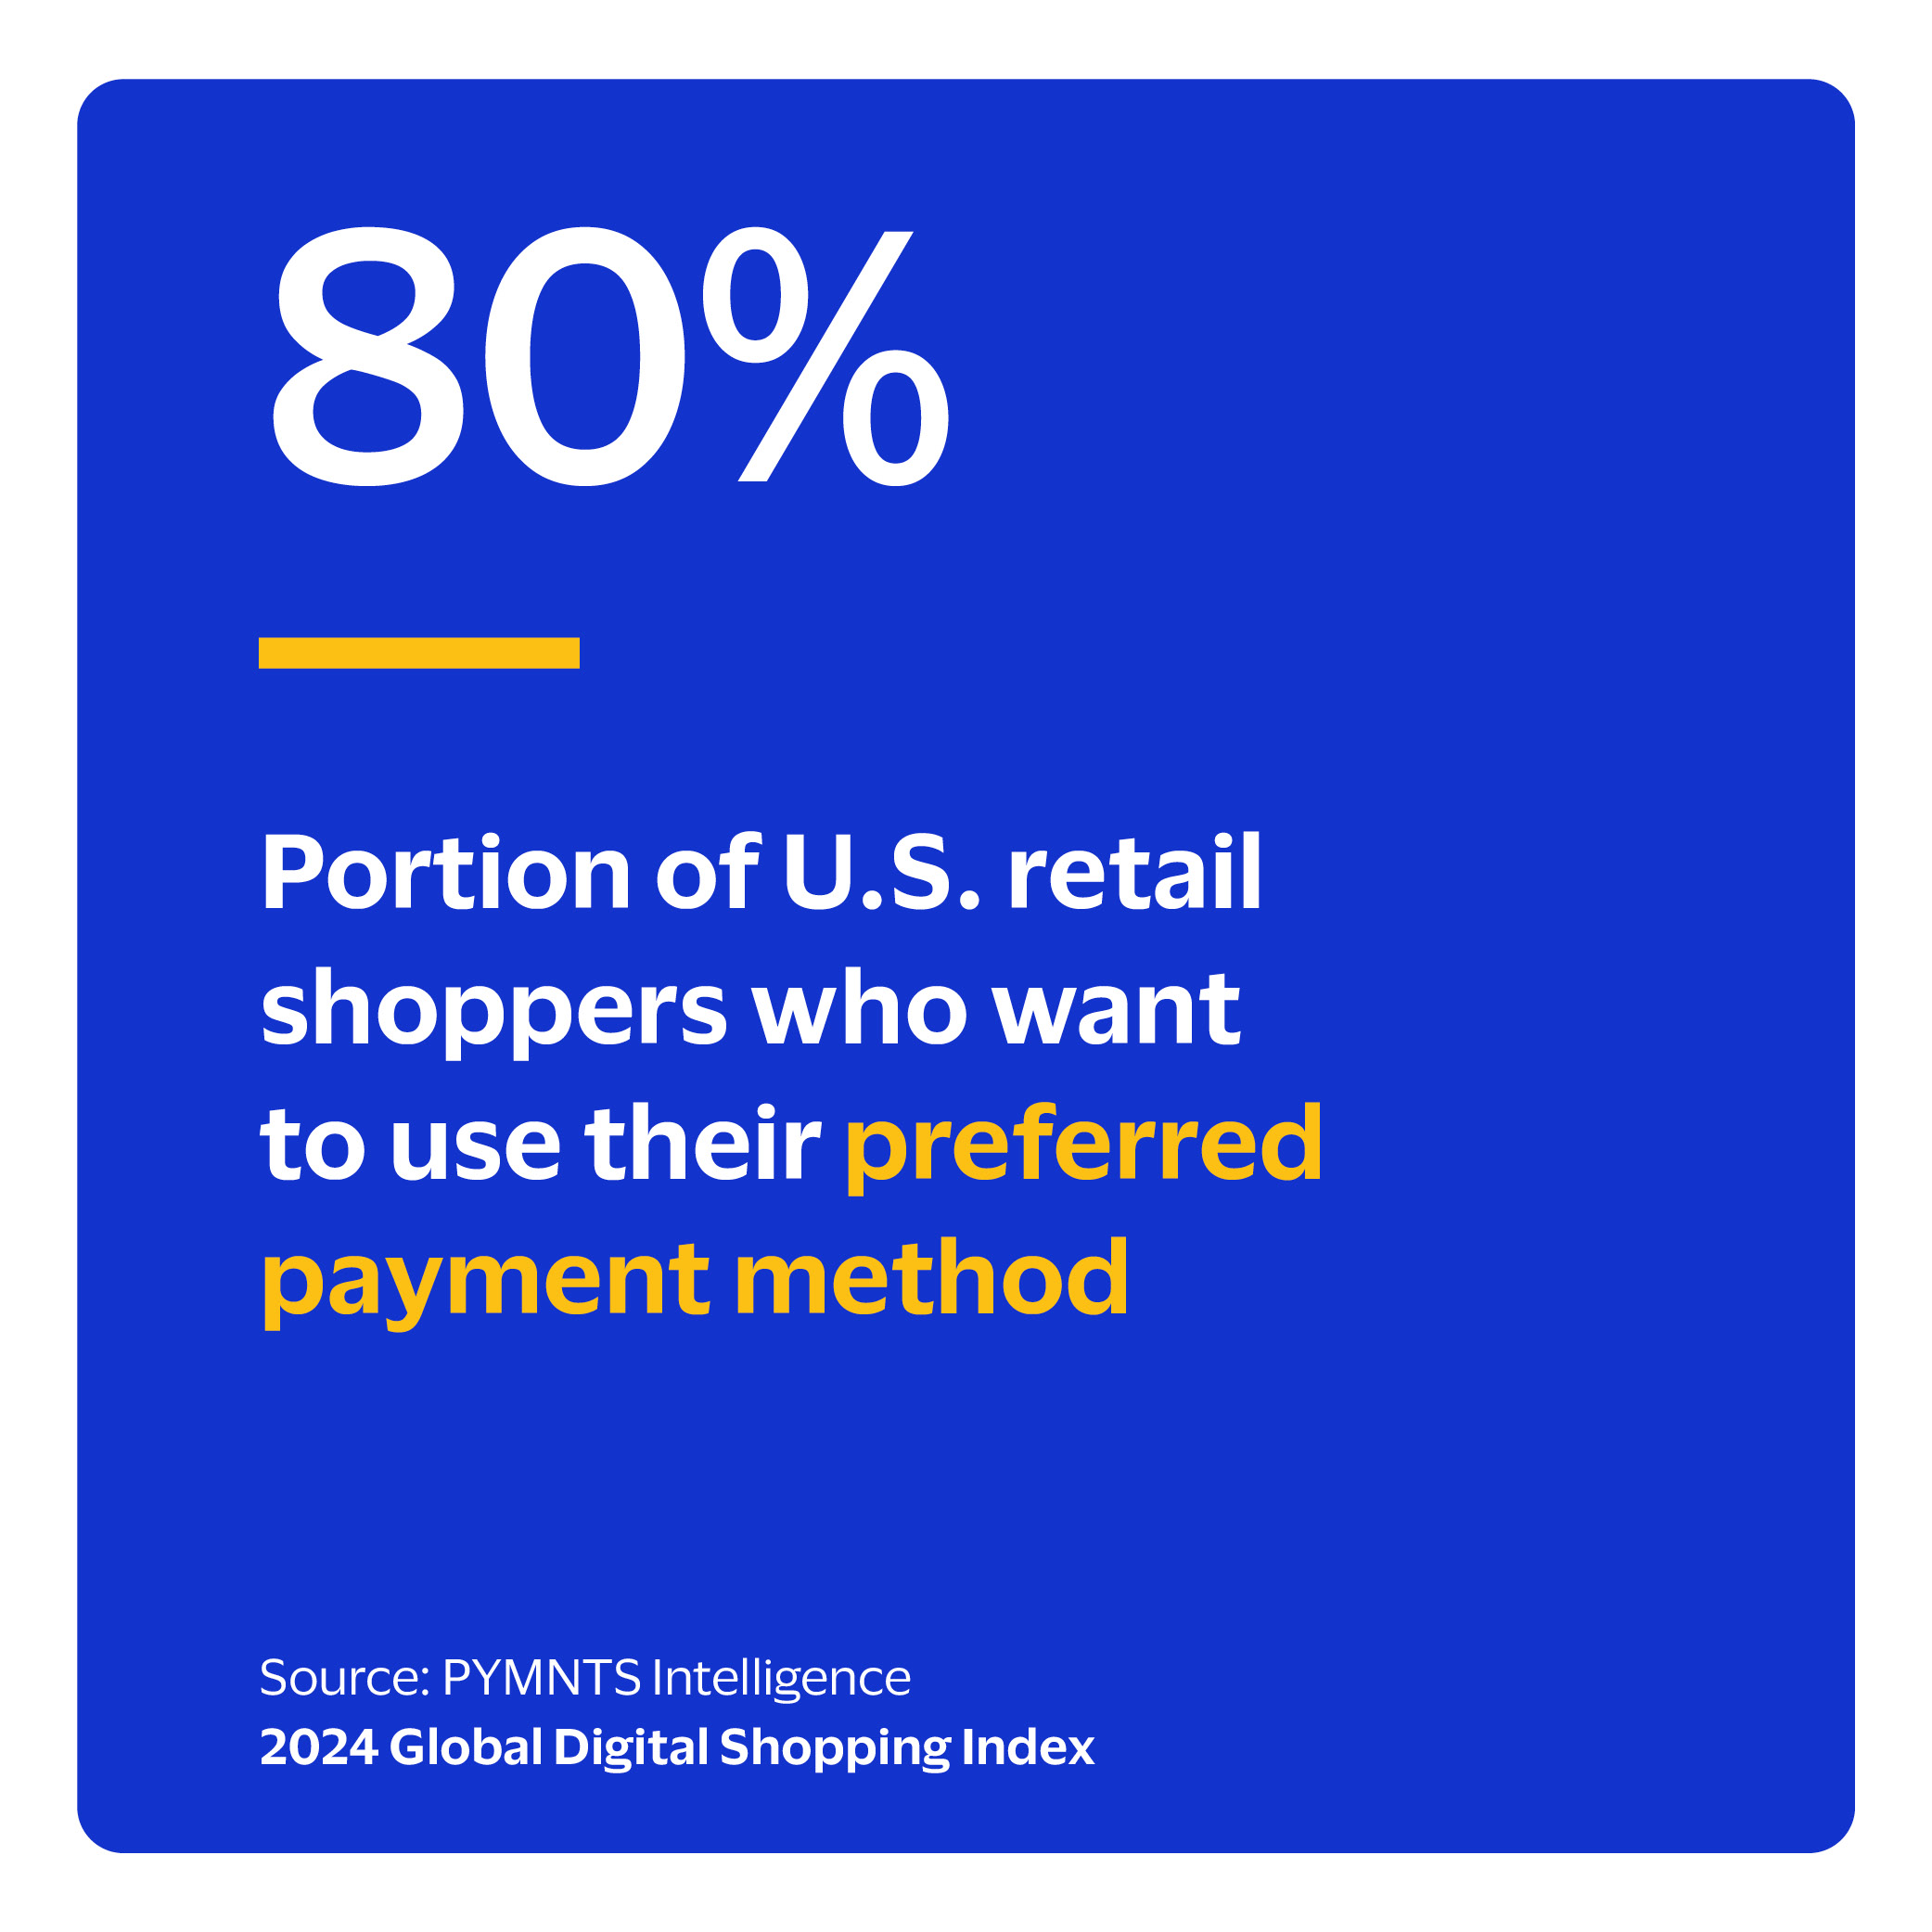 80%: Portion of U.S. retail shoppers who want to use their preferred payment method